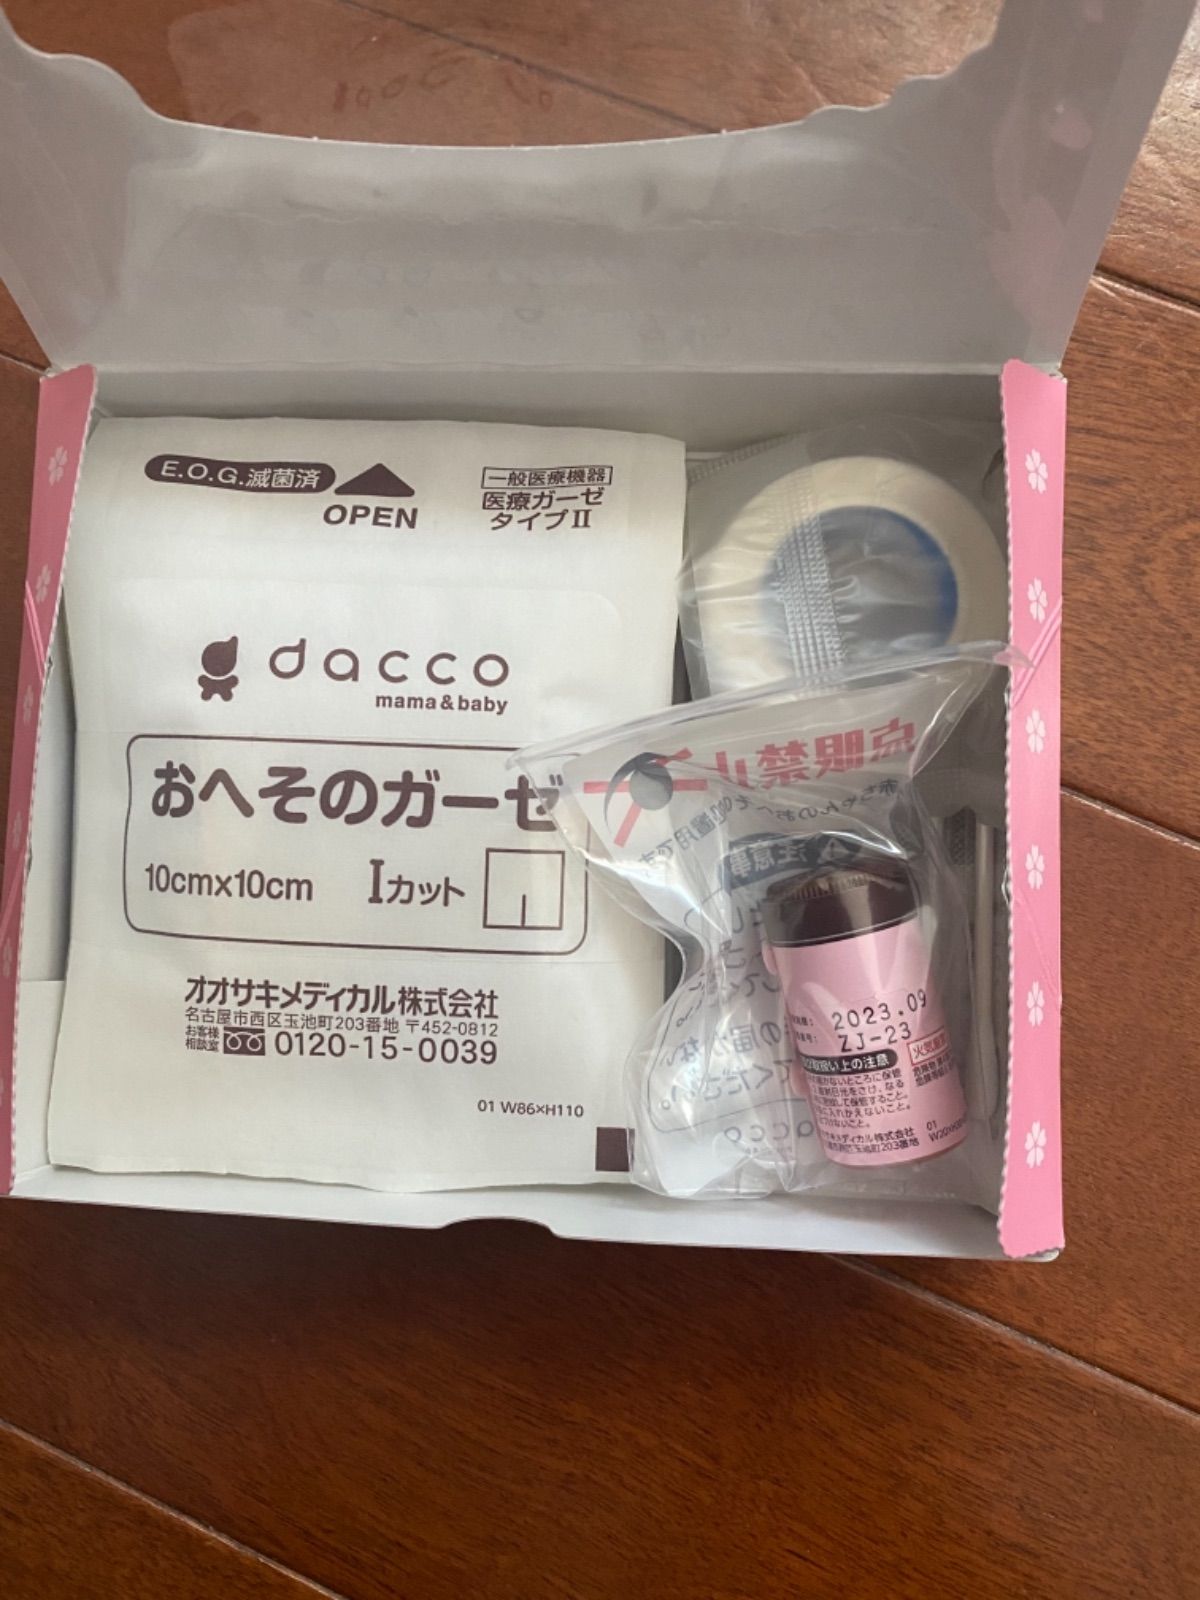 dacco mamababy 臍帯セット